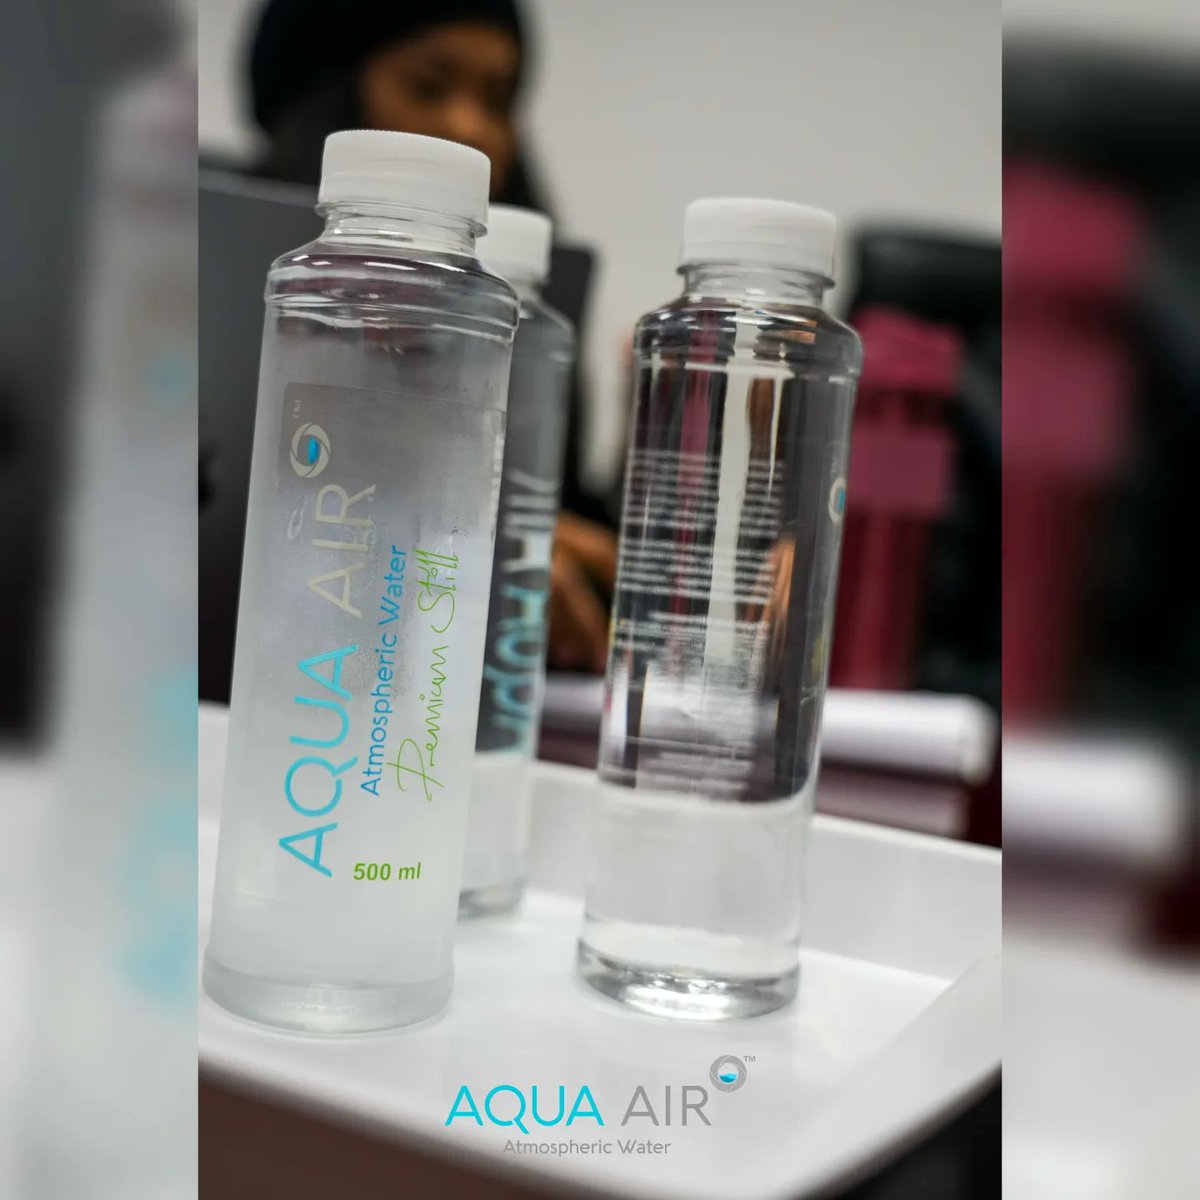 If there's a choice between tap water and bottled water, the consumer can make that choice. . . . #aquaair #aqua4all #allaquainternational #alliancegroupinvestments #Tastetheair #TasteOfInspiration #wearebtmp